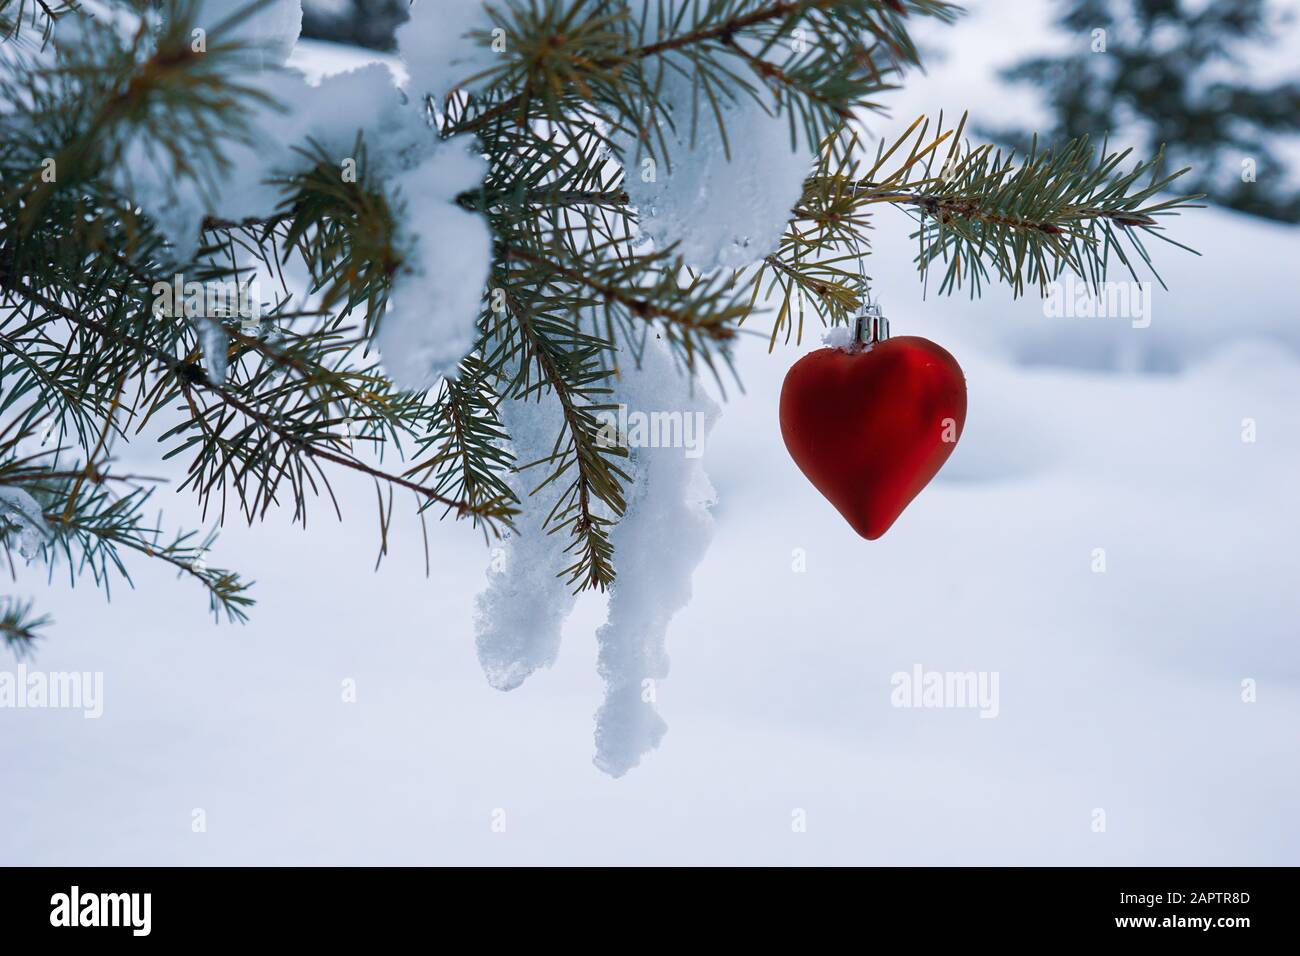 Red heart shaped Christmas ornament hangs on the branch of a snow covered evergreen tree Stock Photo